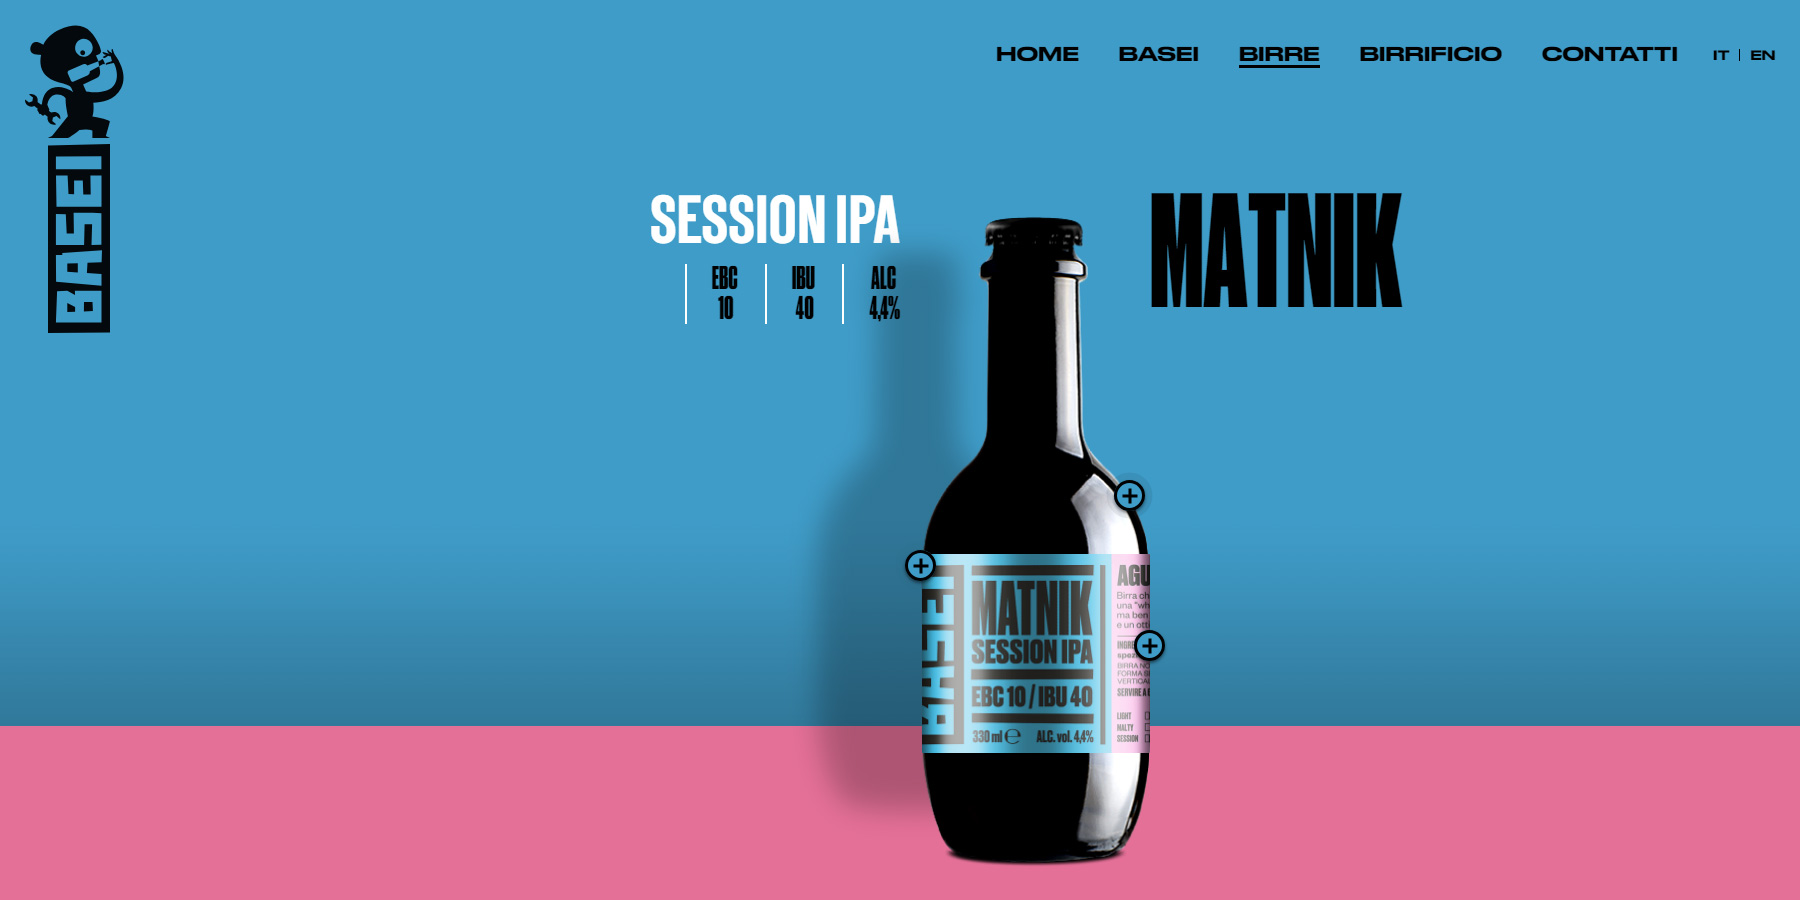 Basei Brewery - Website of the Day